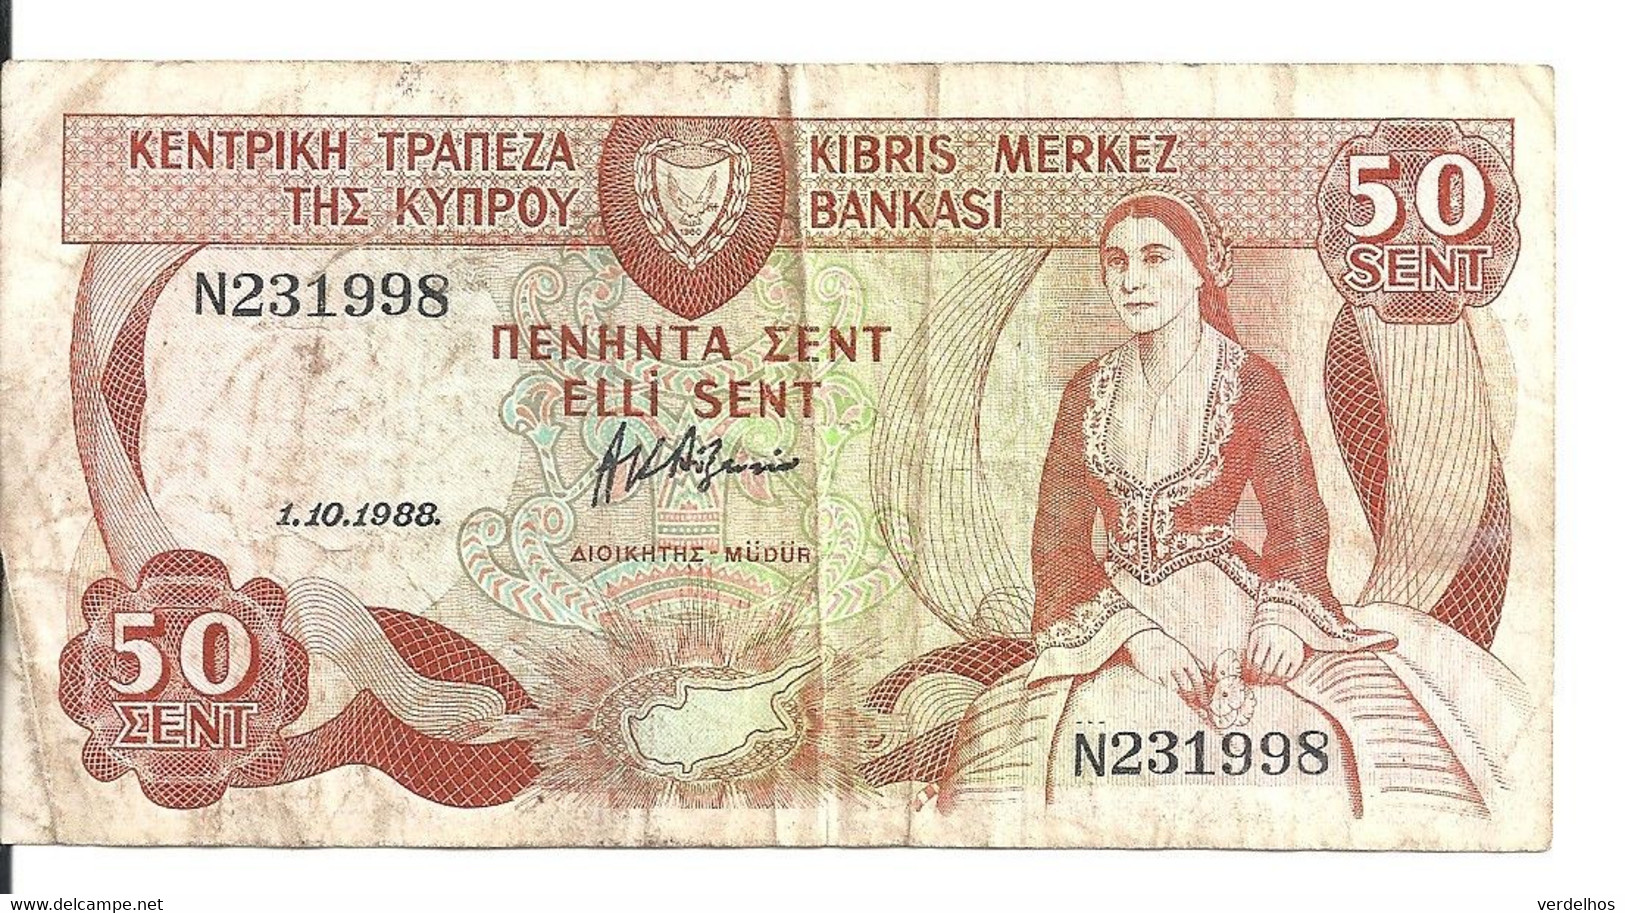 CHYPRE 50 CENTS 1988 VG+ P 52 - Cyprus